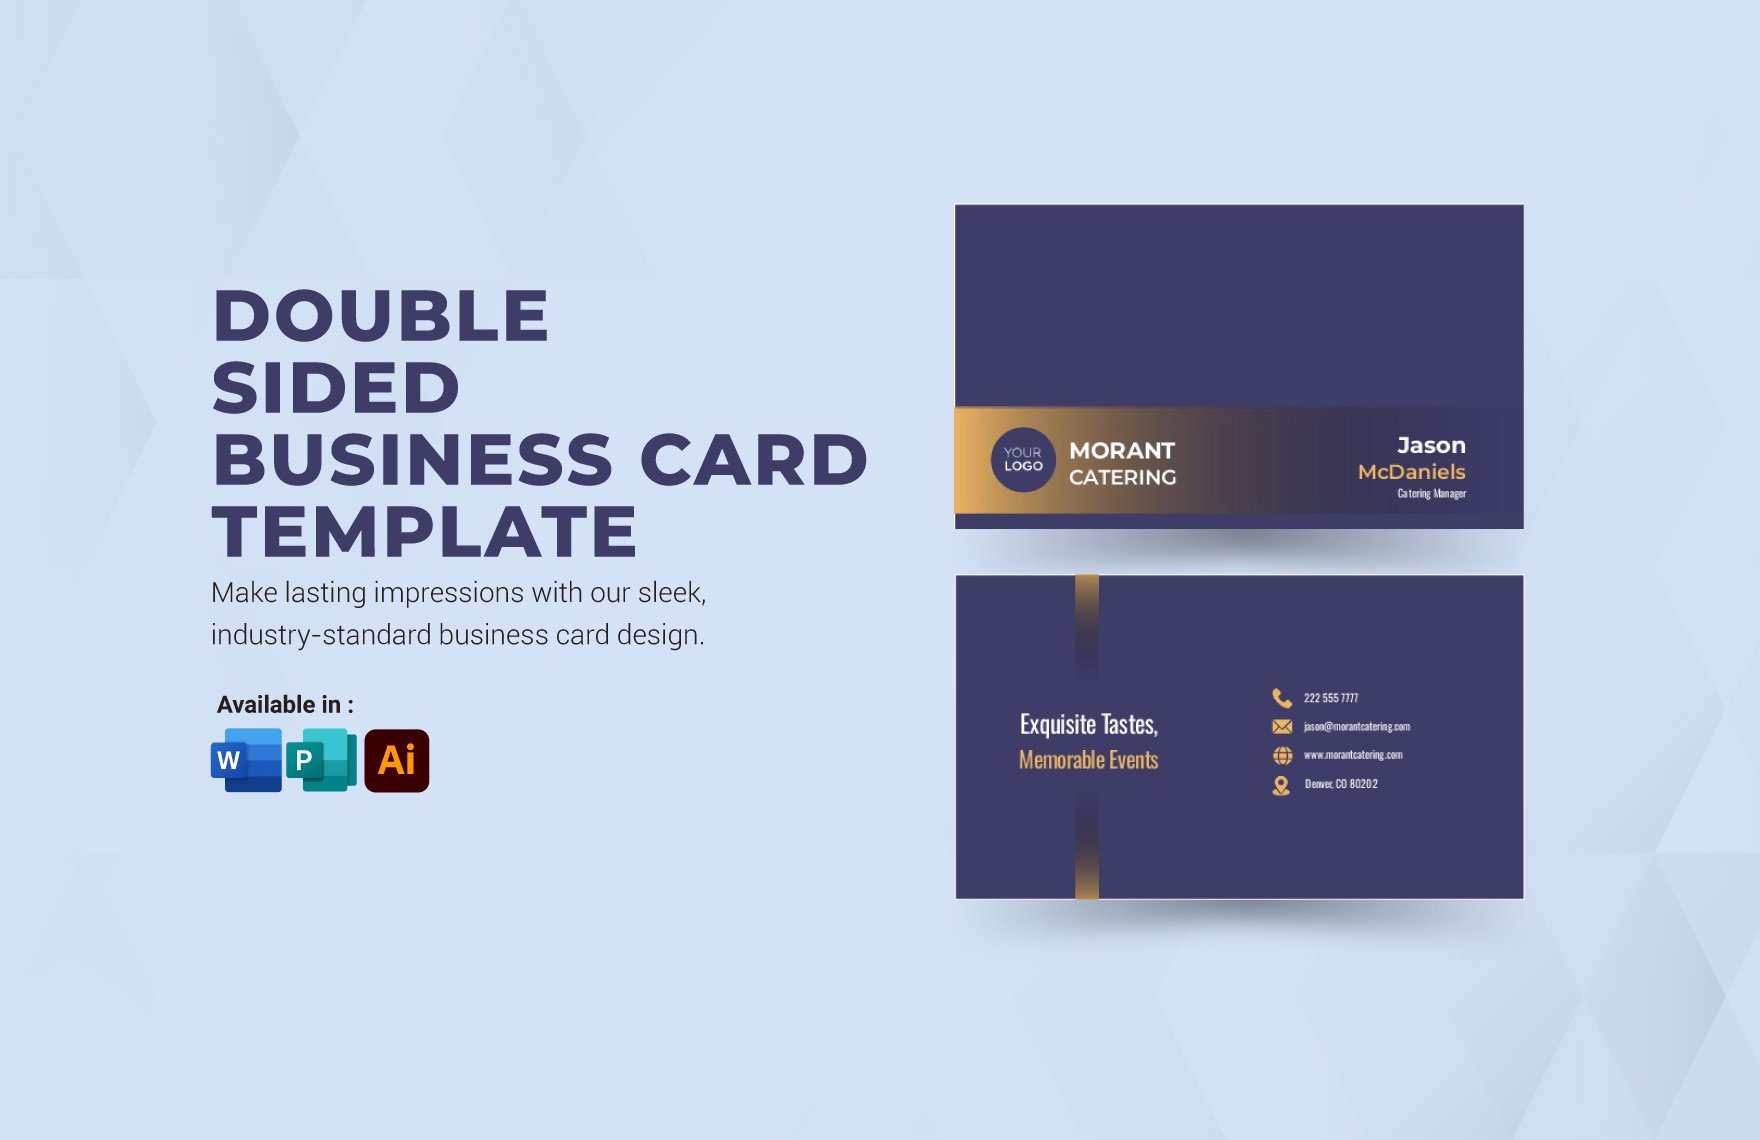 Double Sided Business Card Template in Word, Illustrator, Publisher